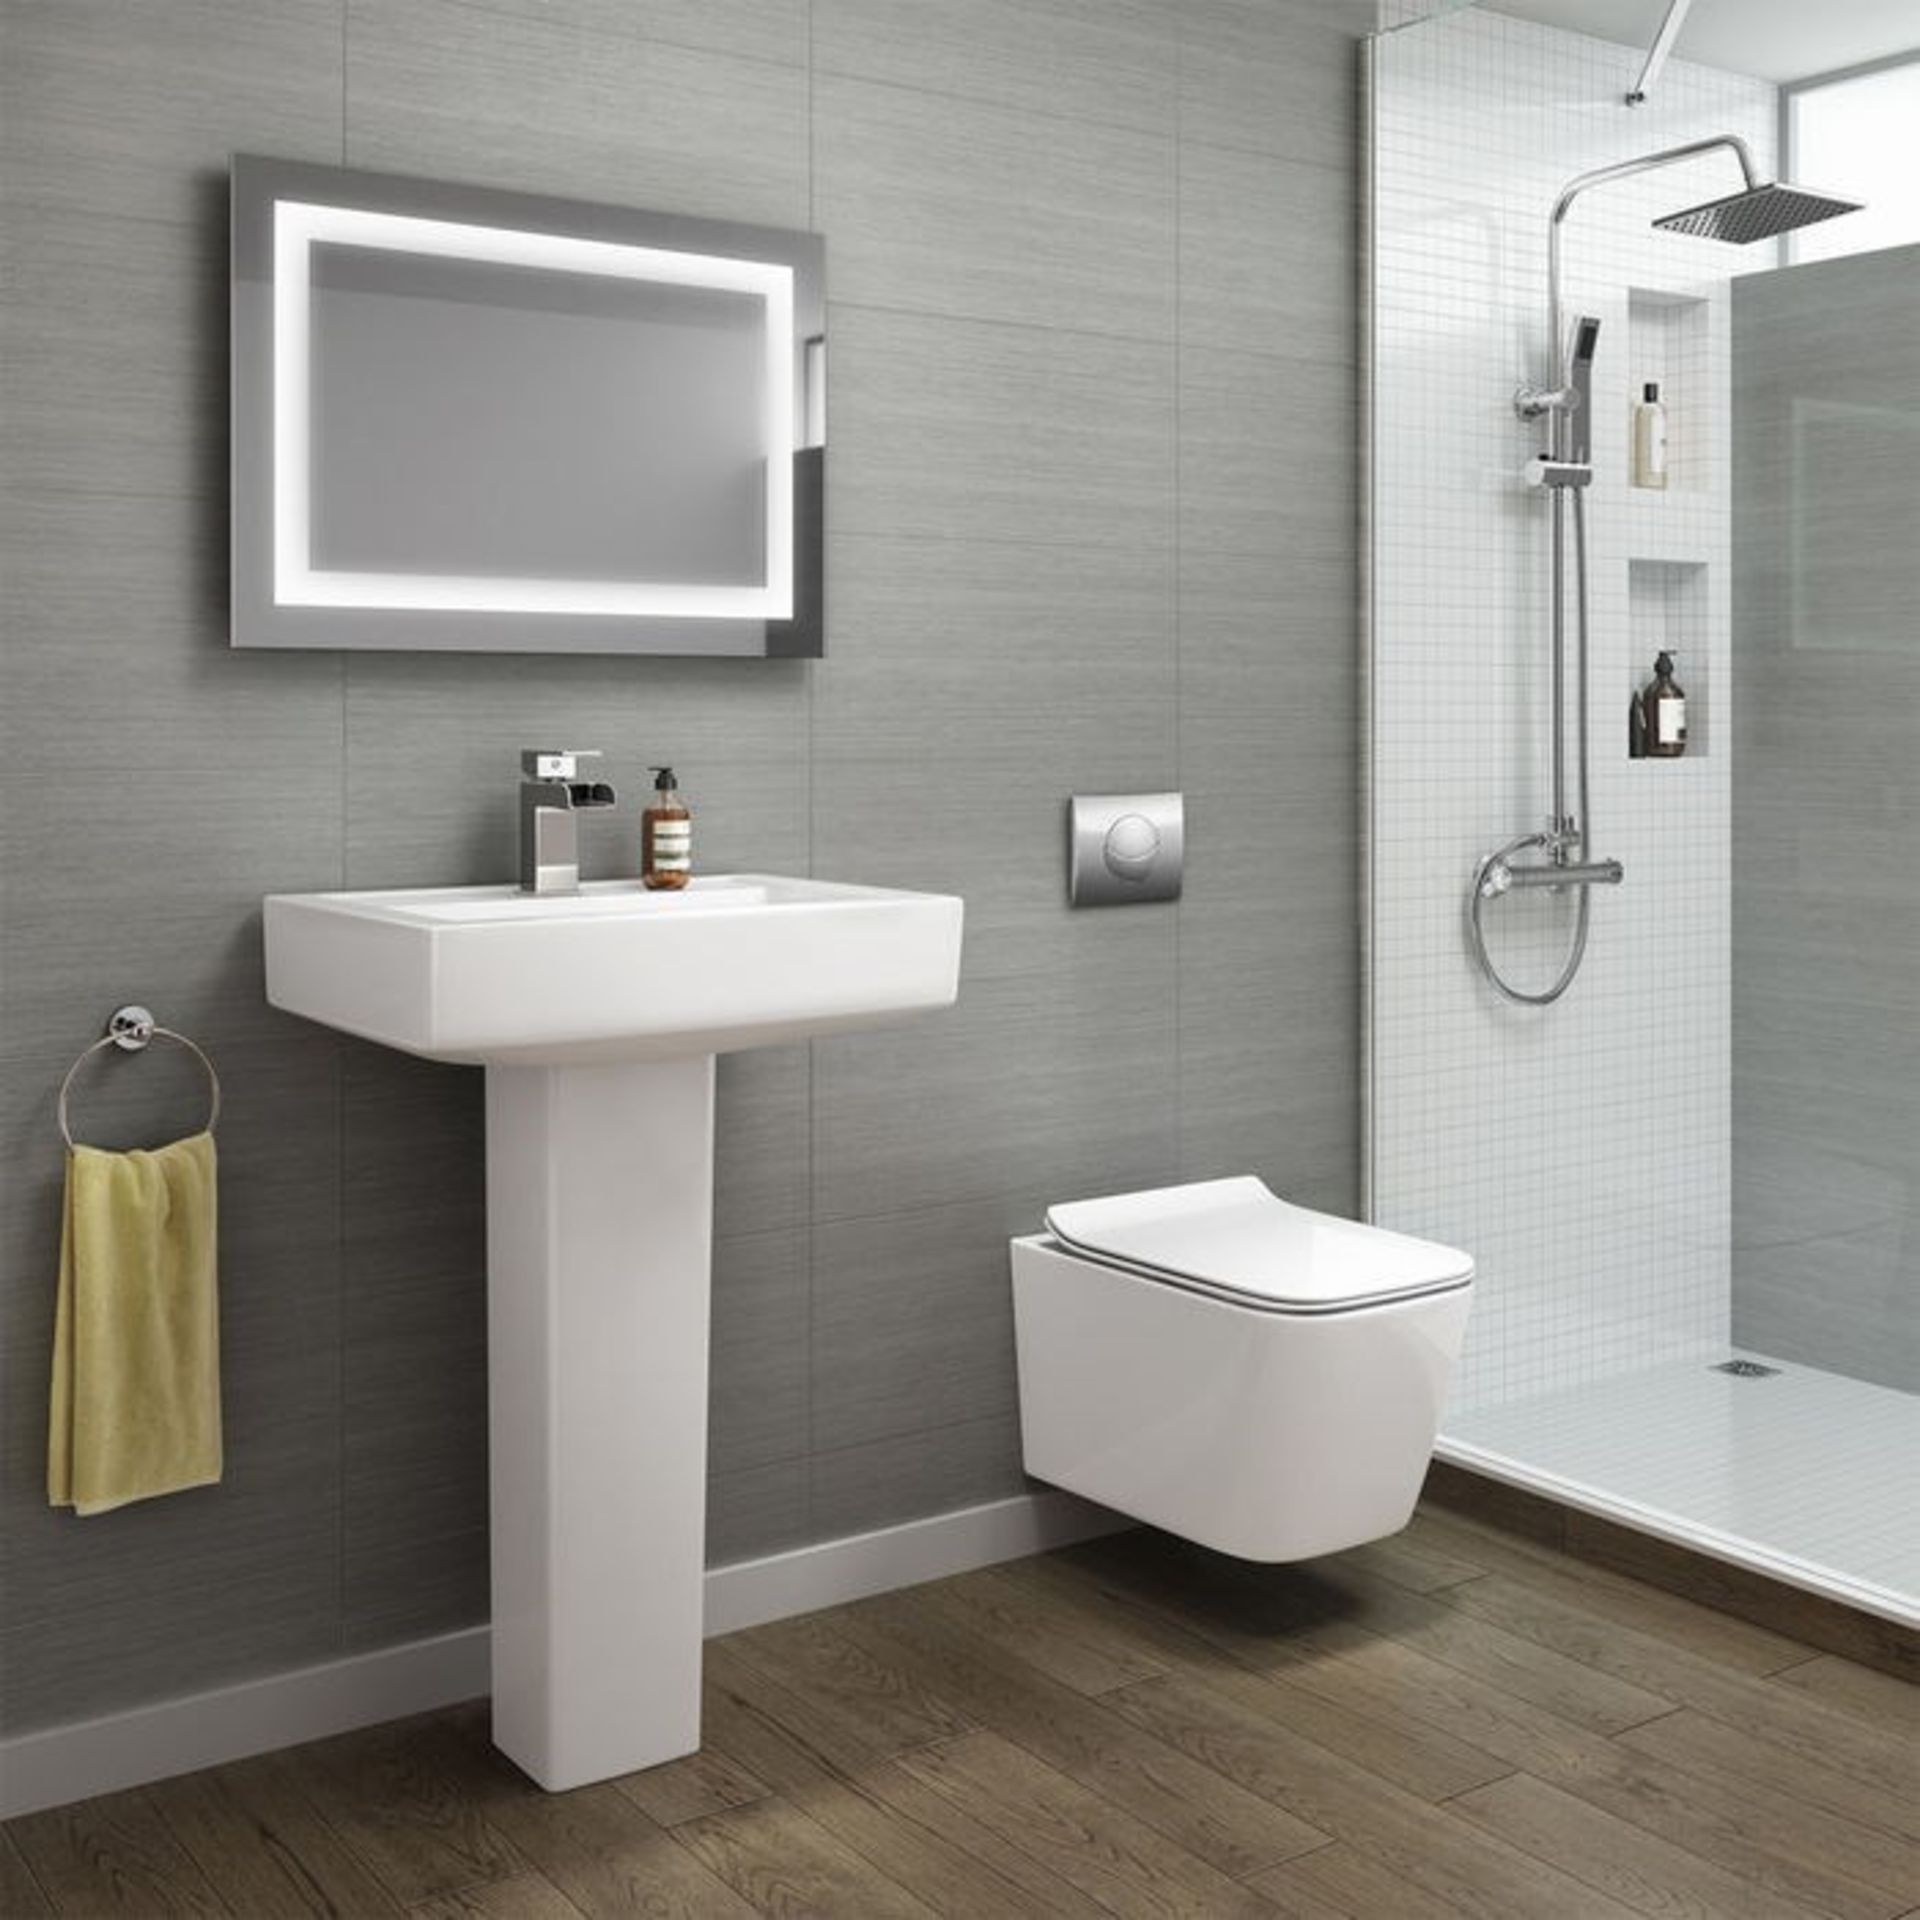 BRAND NEW BOXED Florence Wall Hung Toilet inc Luxury Soft Close Seat. RRP £349.99.Made from Wh... - Image 2 of 3